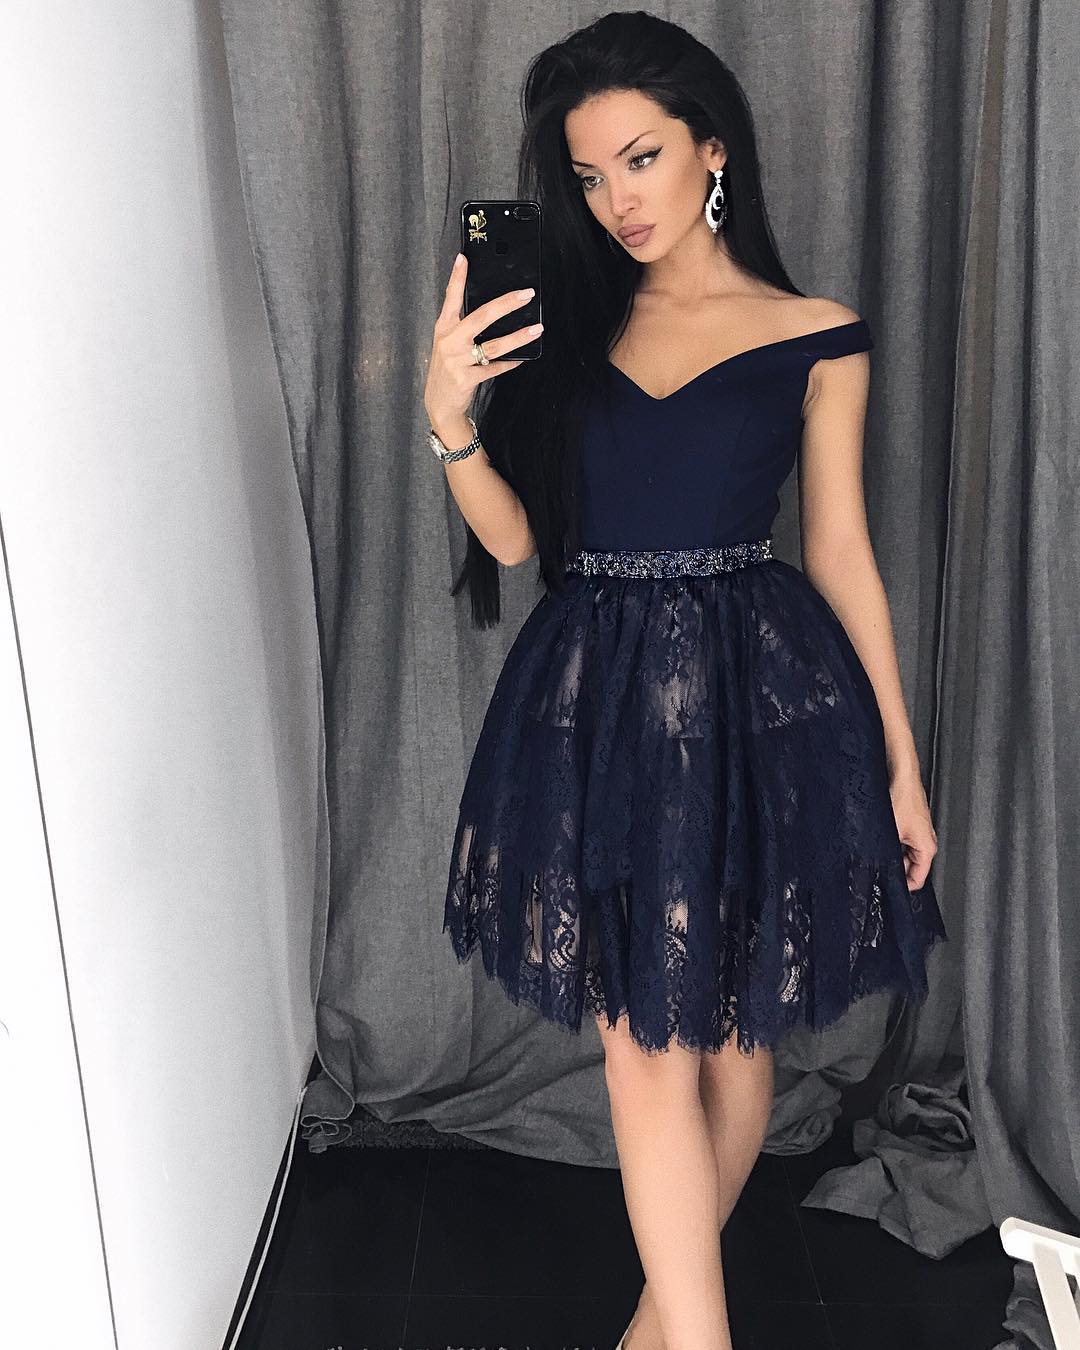 Short Off-Shoulder Homecoming Dress,Lace Semi-Formal Party Gown，2018 Beaded Prom Gowns .Navy Blue Lace Prom Dresses Short , 2018 Plus Size Women Party Gowns .Wedding Guest Gowns 